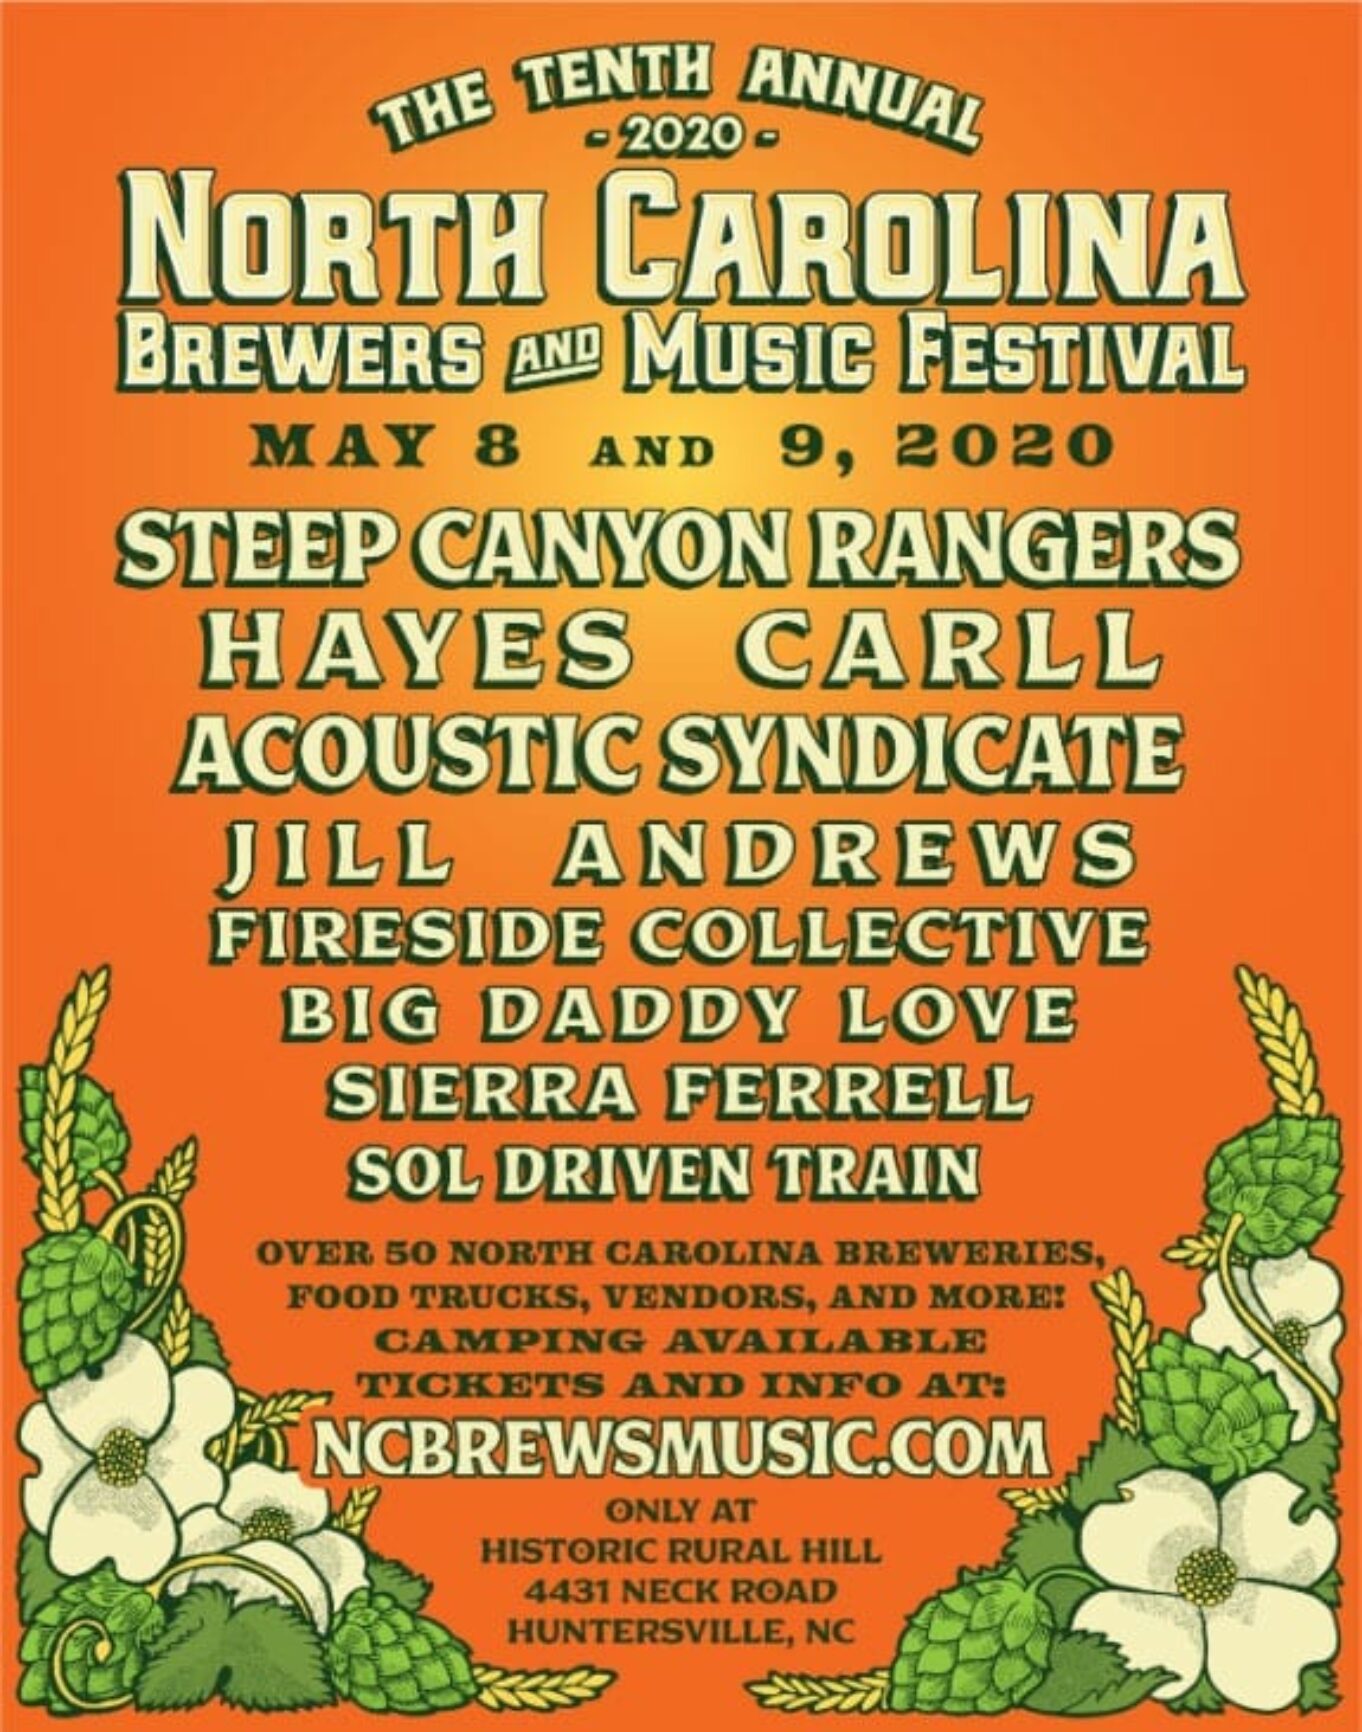 North Carolina Brewers and Music Festival Announced Live Music News